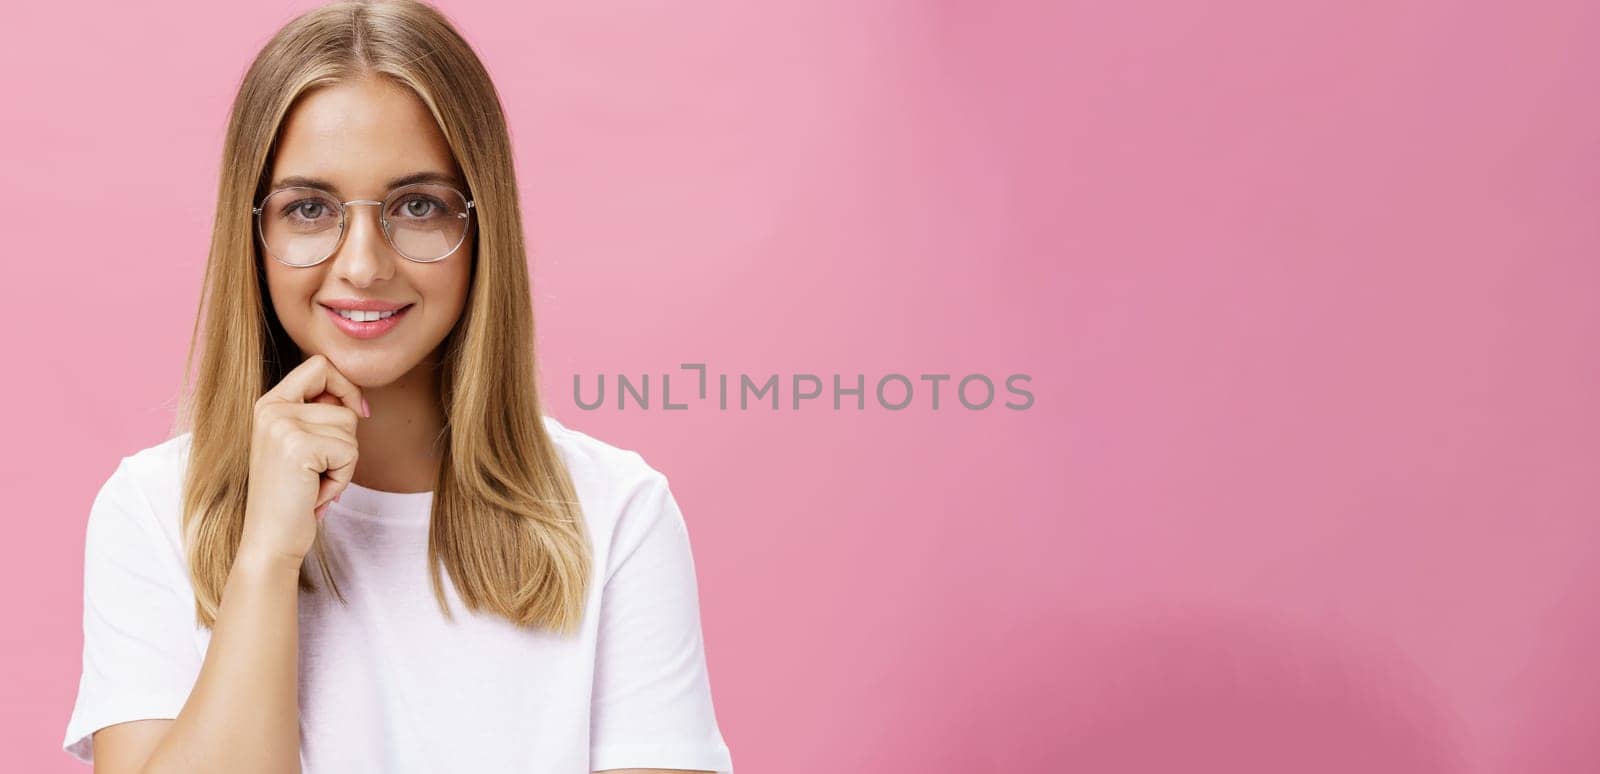 Woman listen with interest and smart look touching chin in thoughtful gesture smiling pleased, amused, looking self-assured at camera with intelligent expression over pink background, wearing glasses.